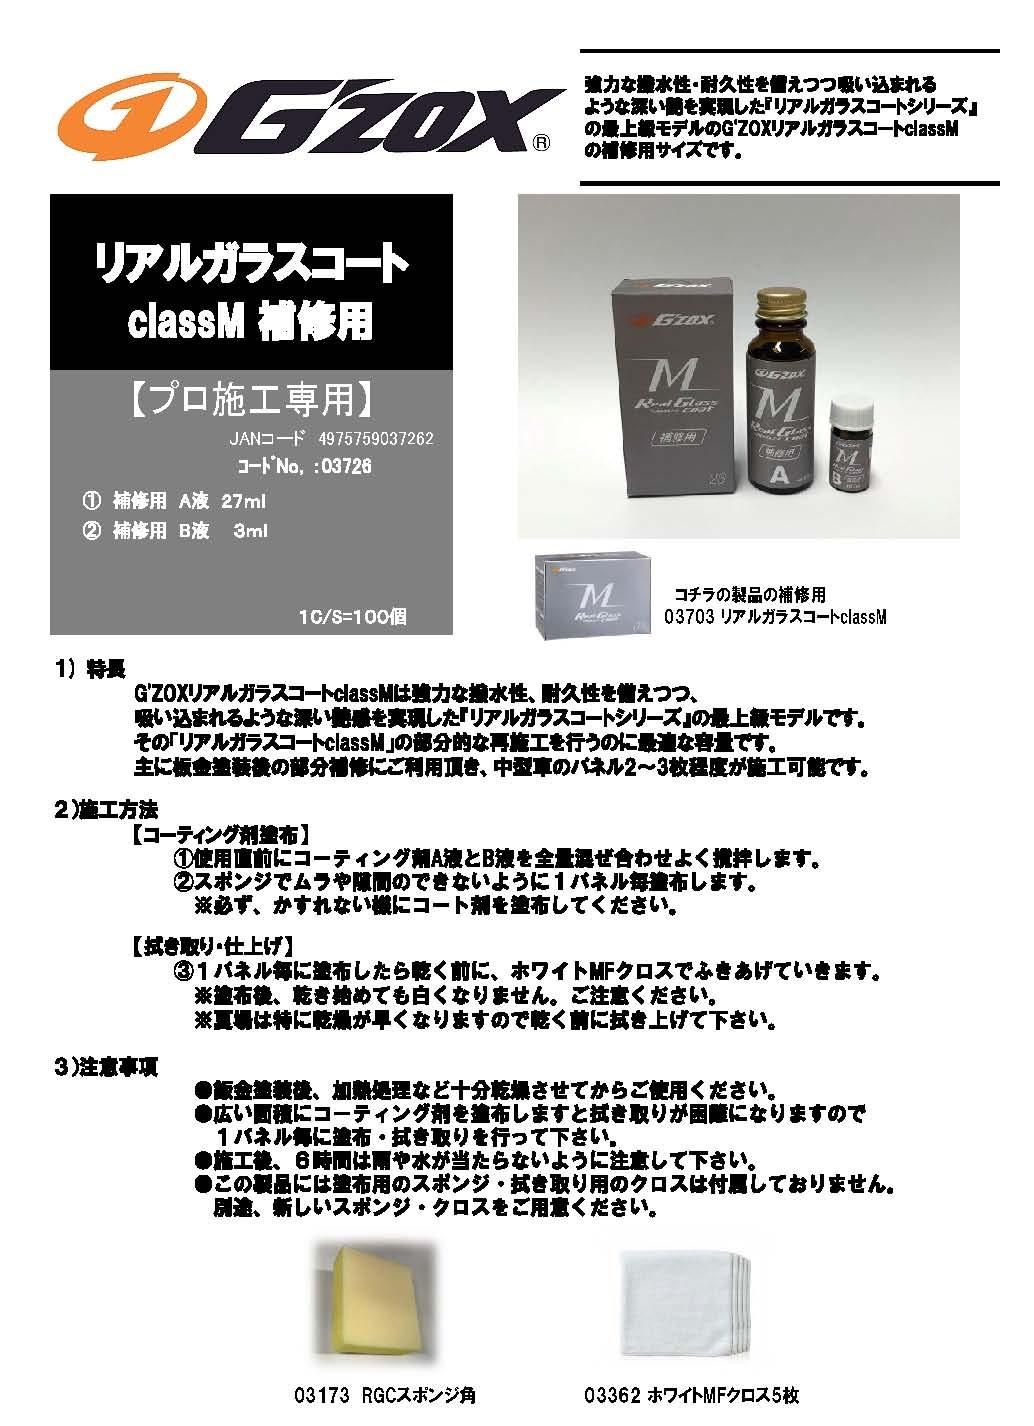 Ｇ'ZOX Real Glass coat class Mメンテナンス用品 - メンテナンス用品